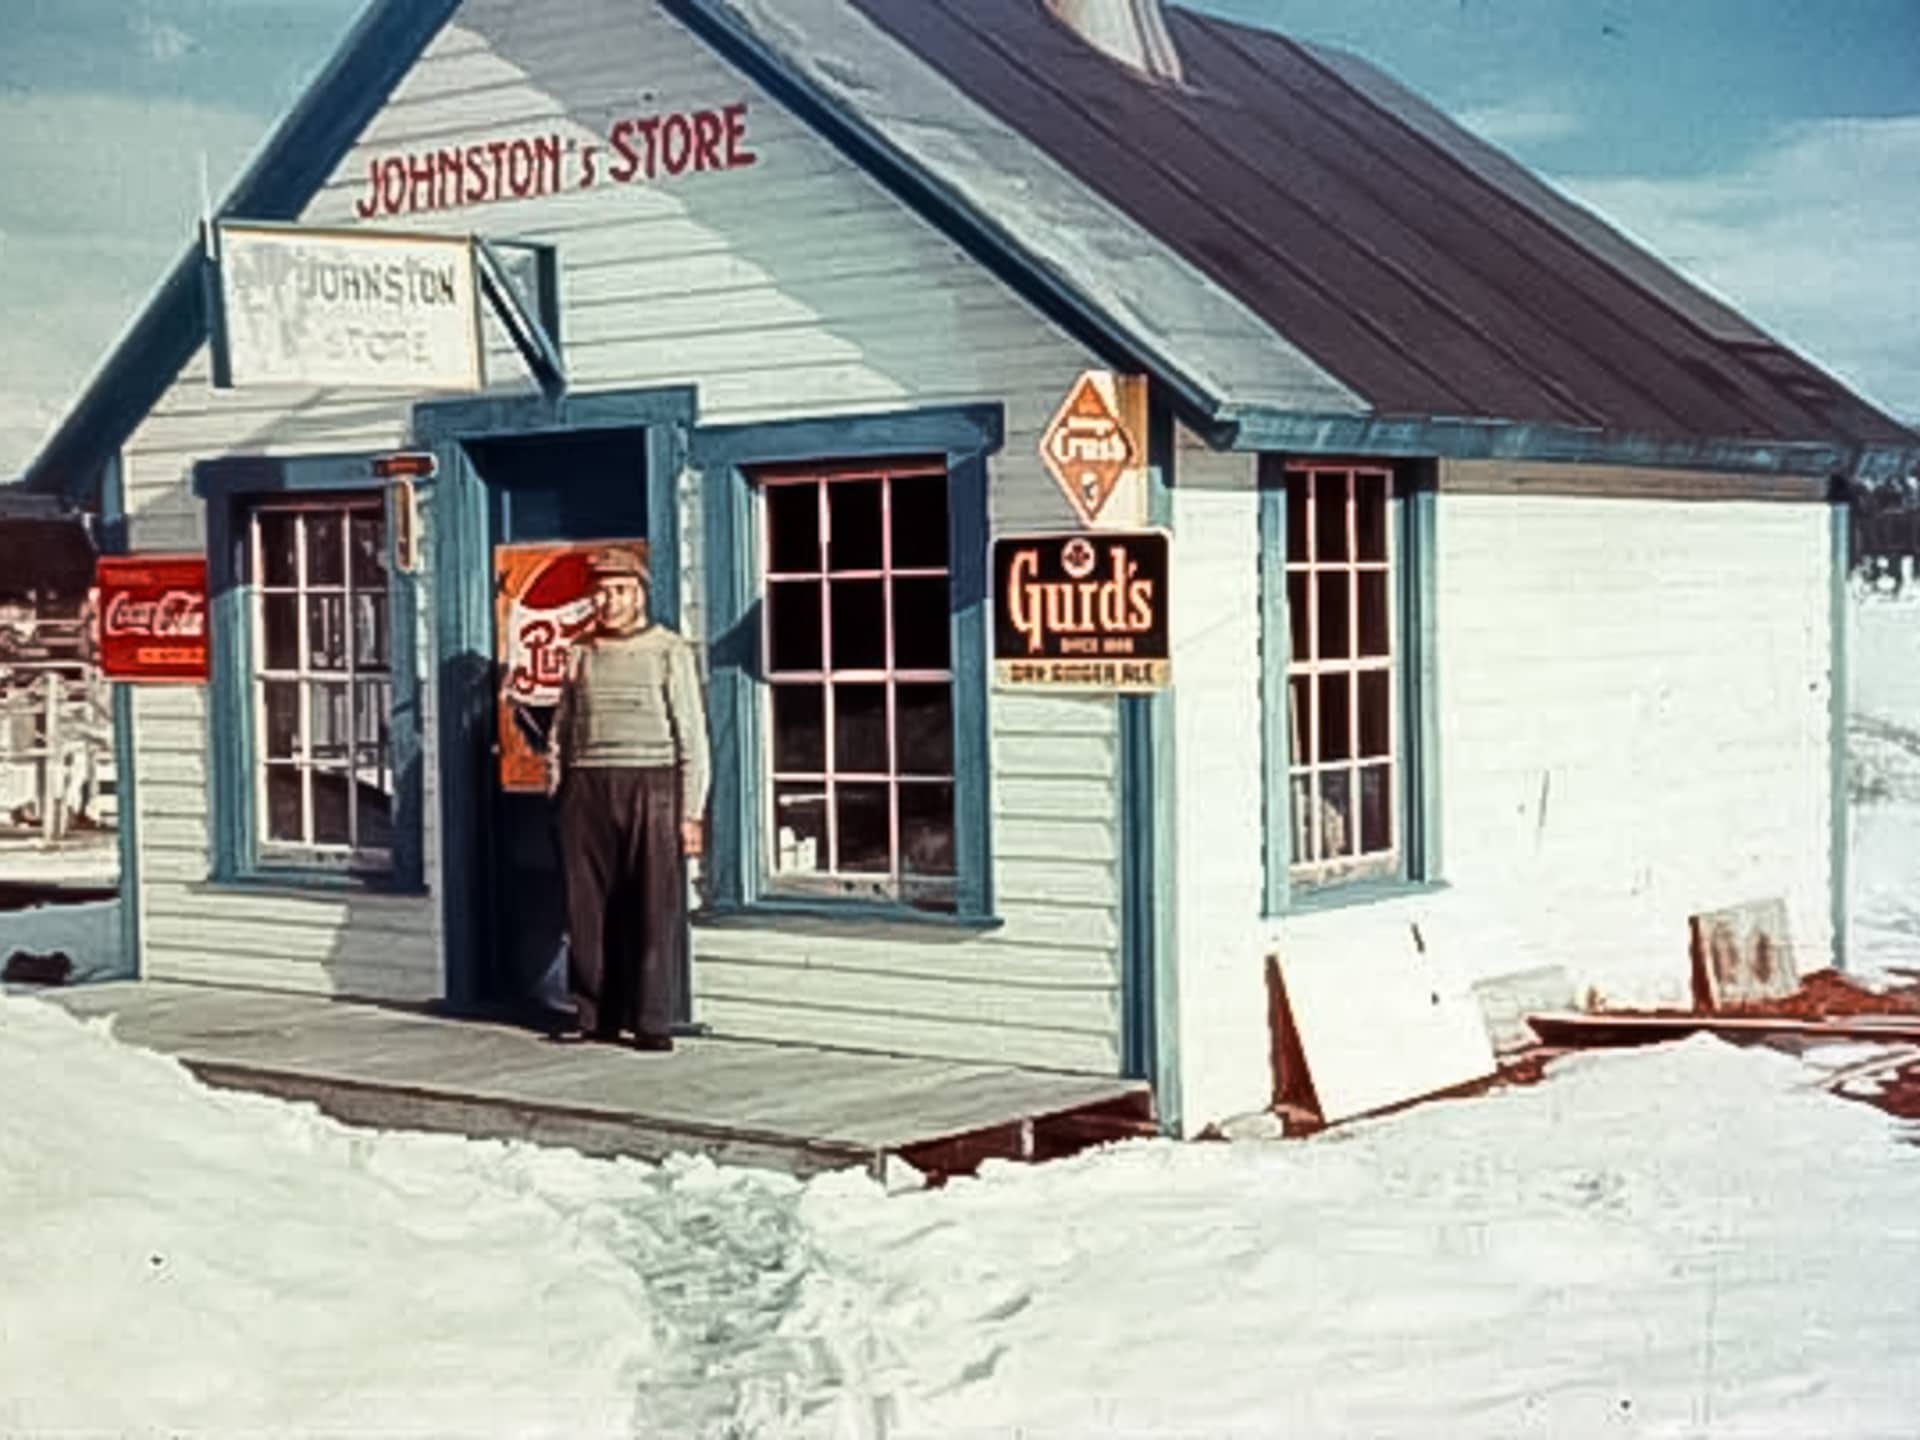 George Johnston standing in front of his Teslin store